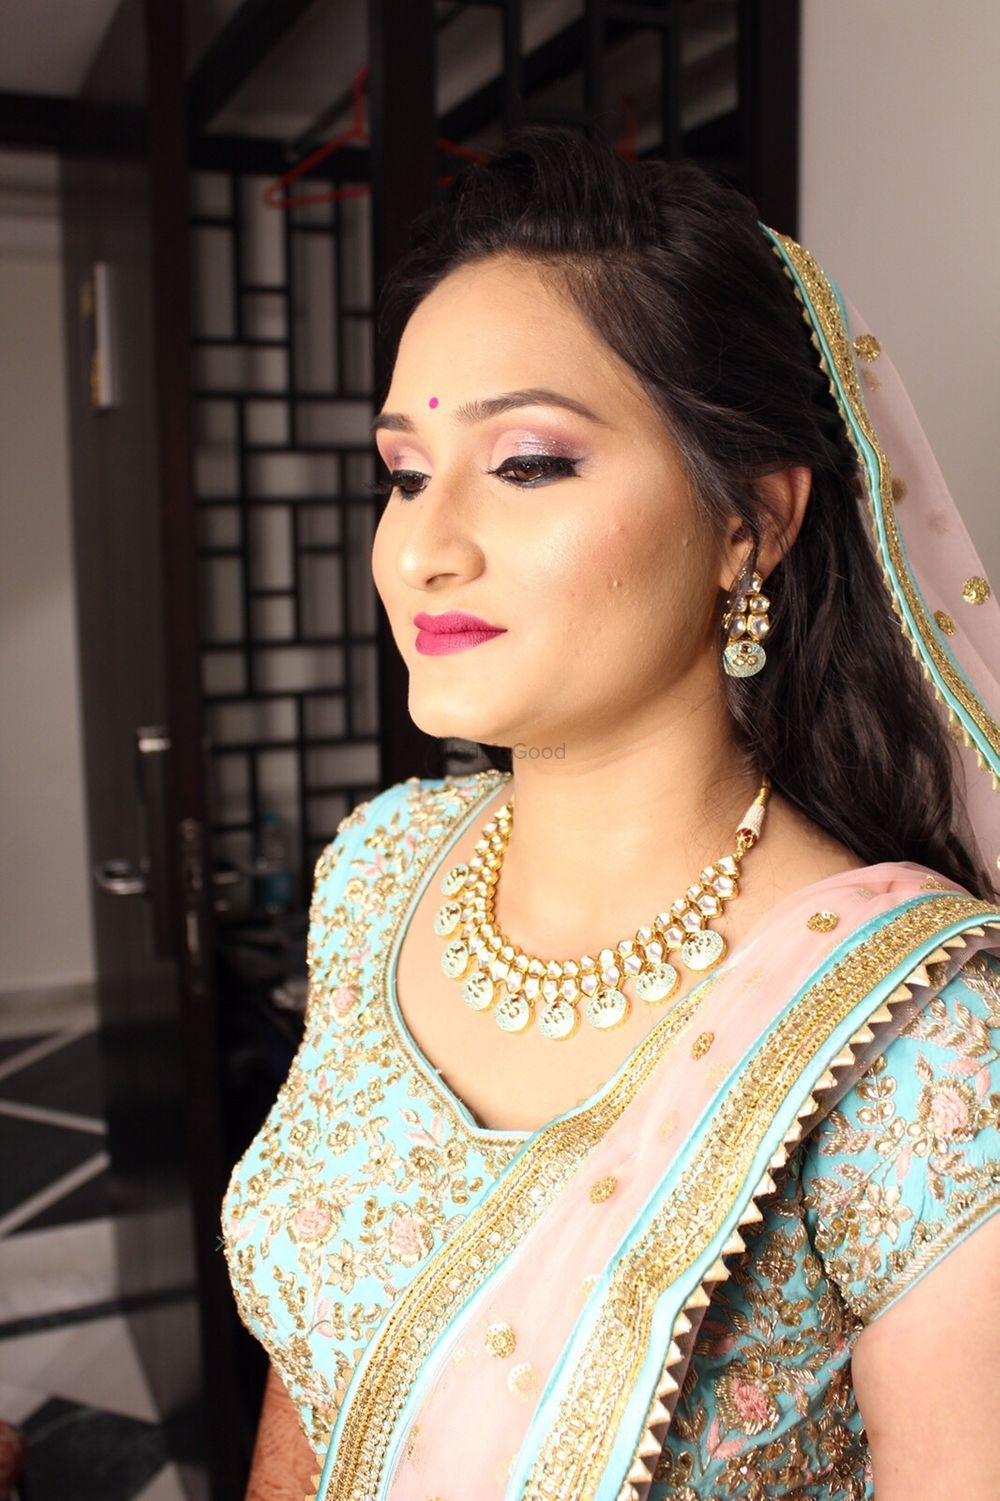 Photo From Engagement  - By Glimpse Makeup By Ankita